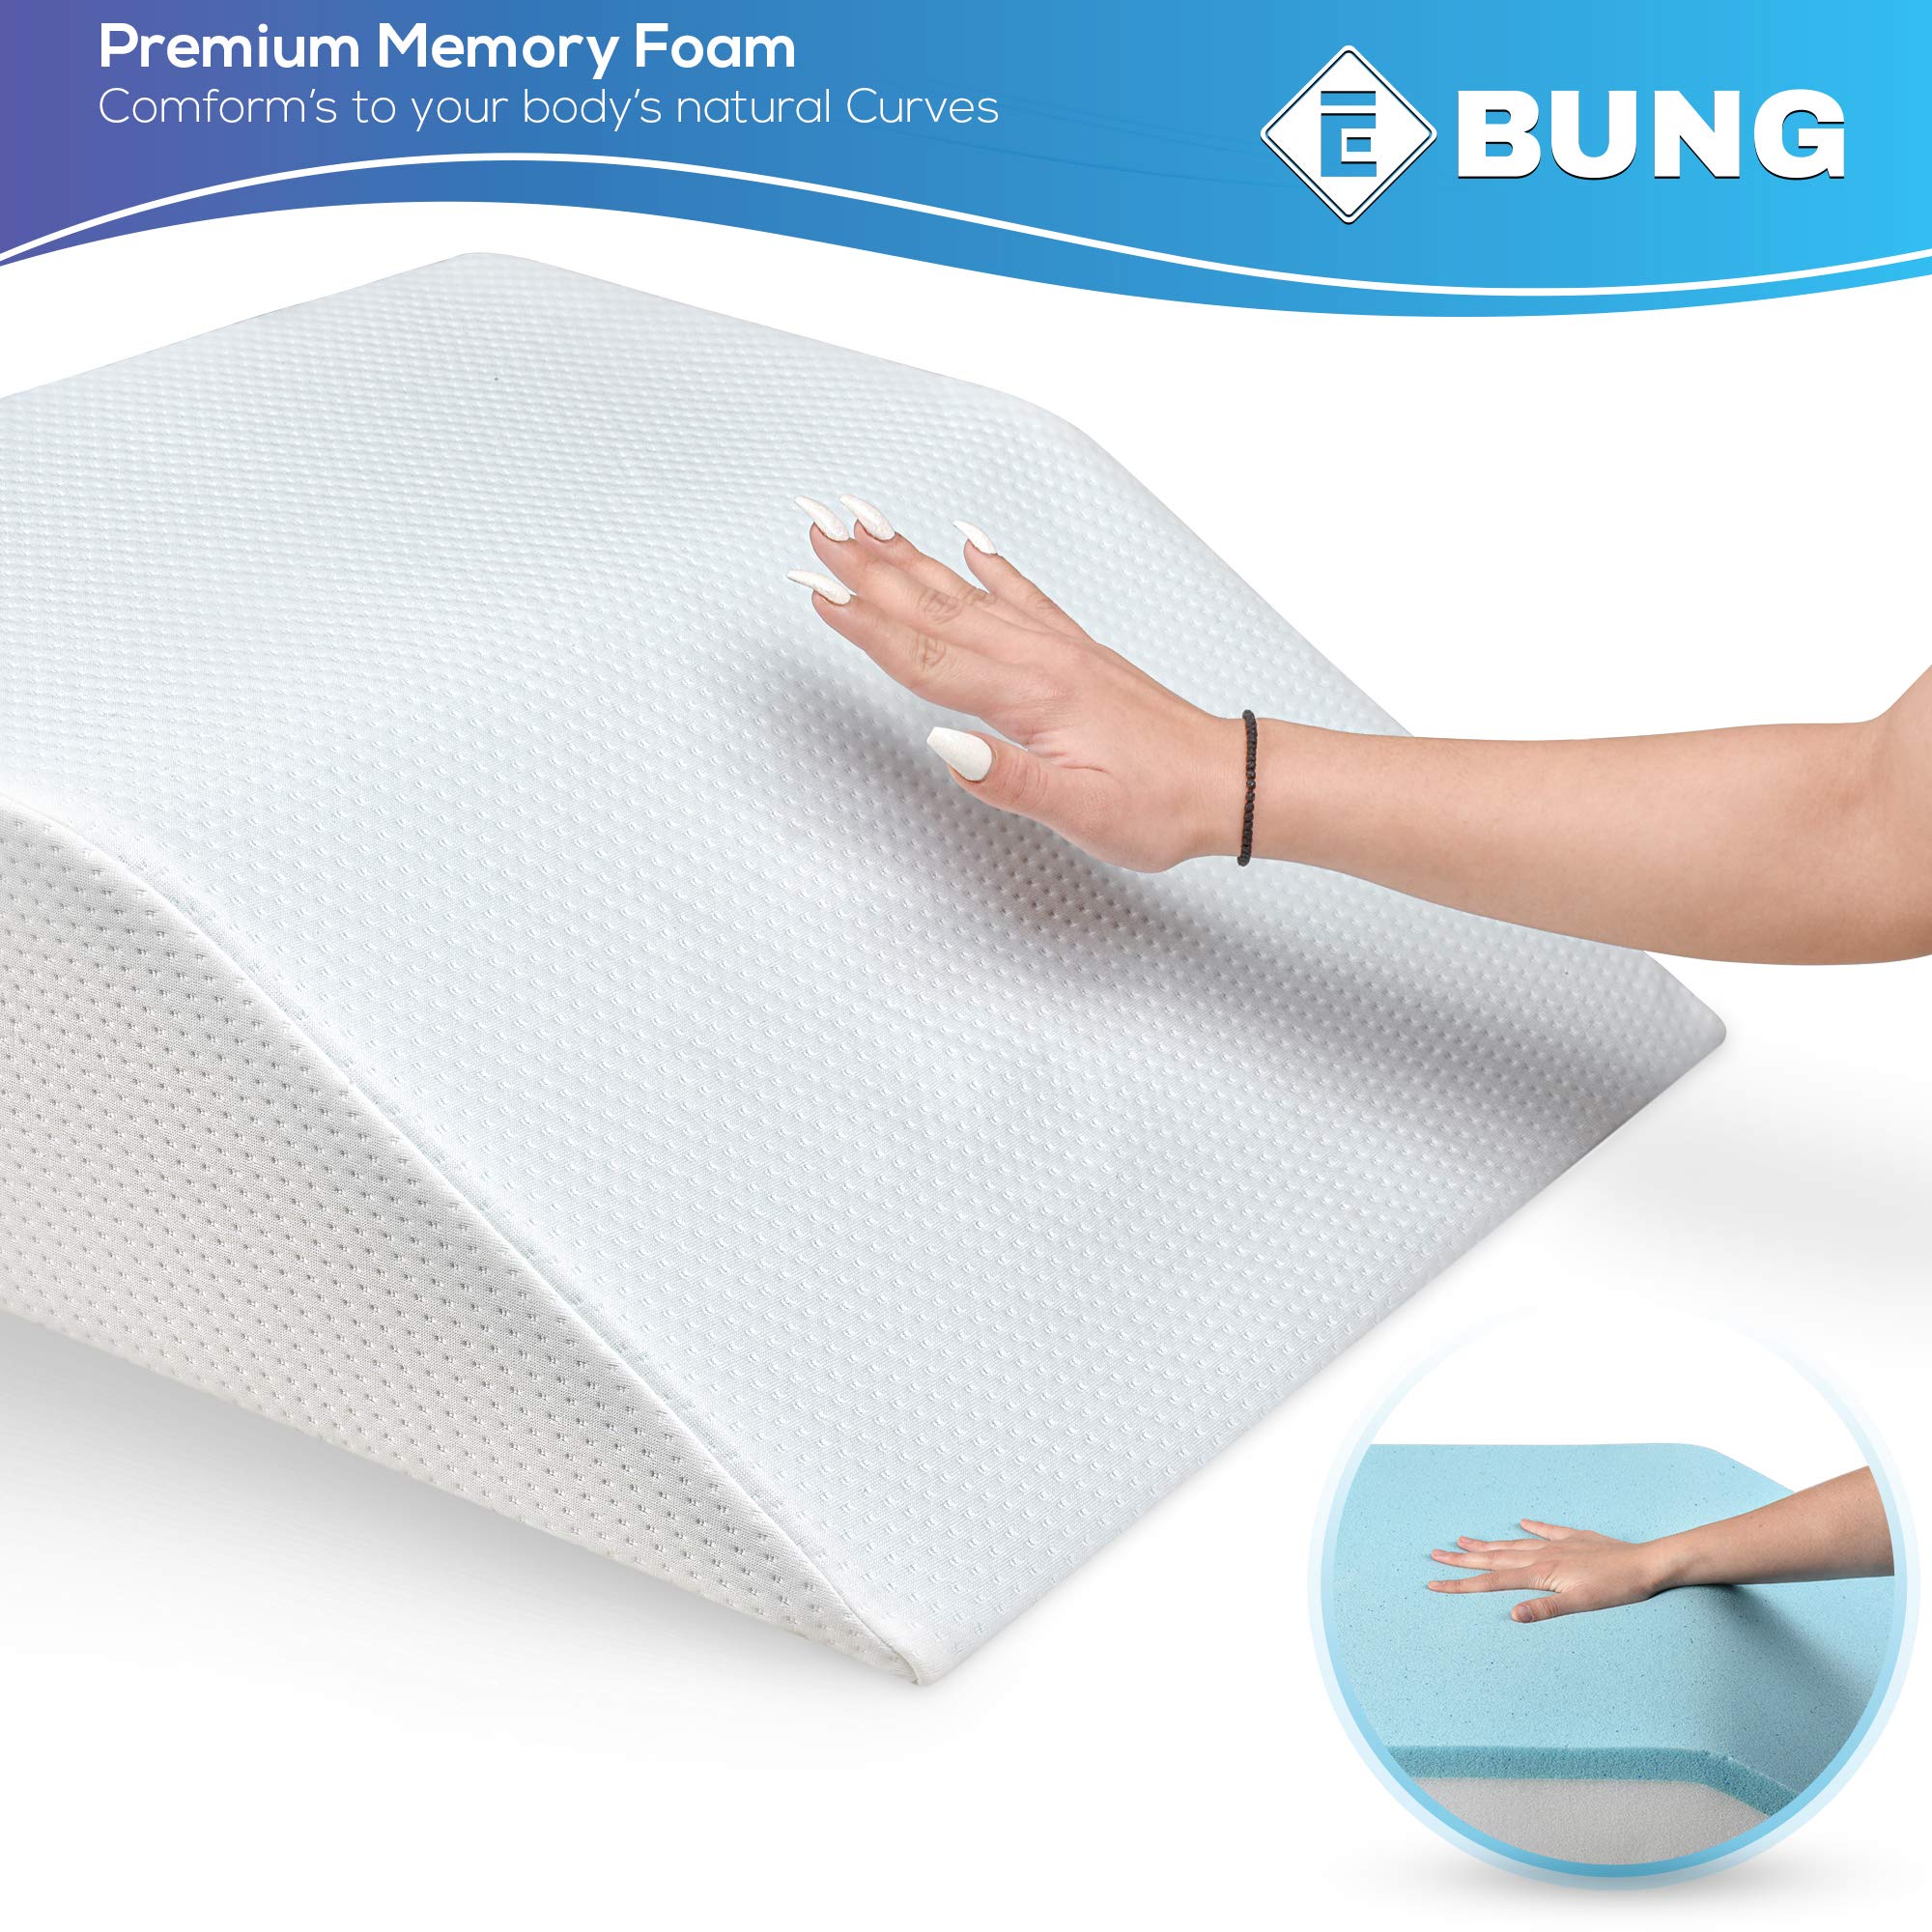 Ebung Leg Elevation Memory Foam Pillow with Removeable, Washable Cover  - Very Good